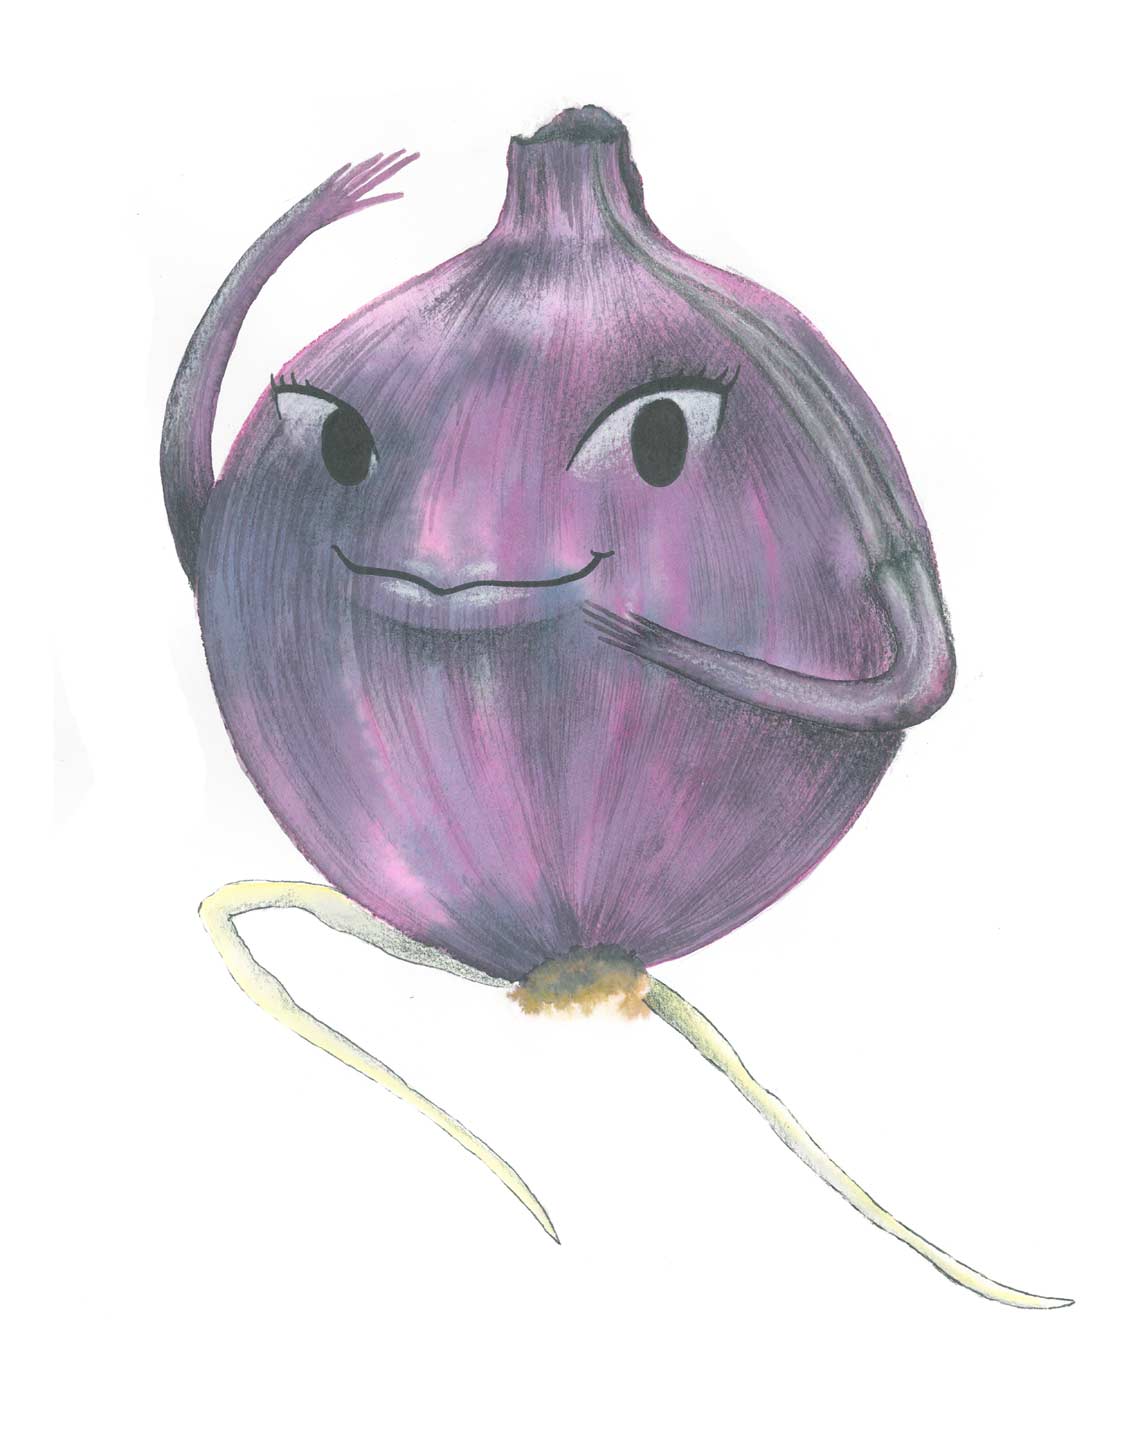 Object drawing of a onion with pencil shading or rendering and with opaque  colors | Object drawing, Pencil shading, Onion drawing